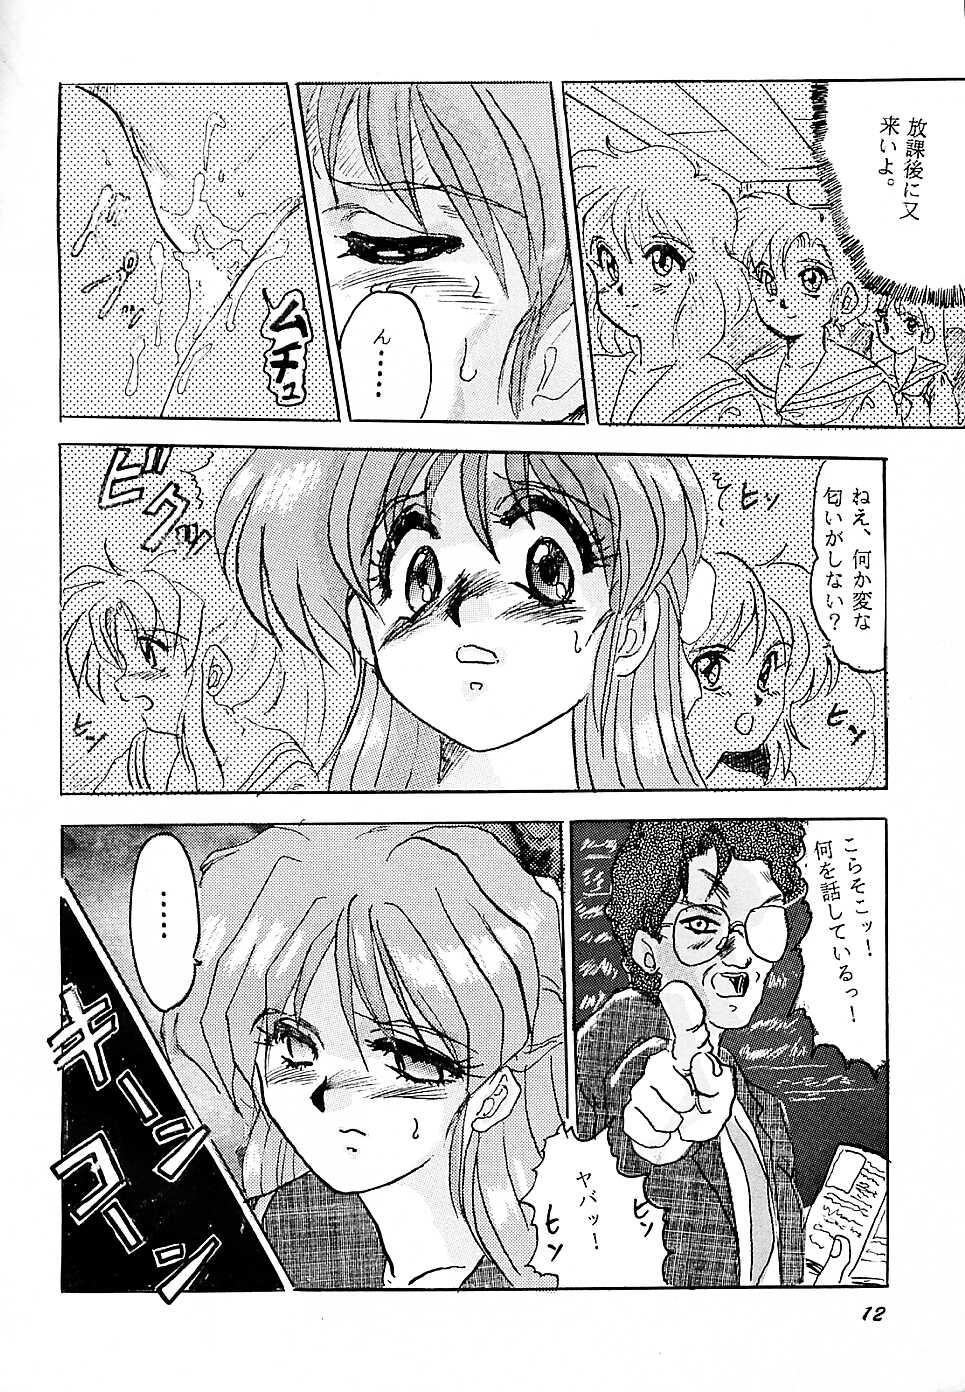 18 Year Old Porn F 93C - Brave express might gaine Orgia - Page 11